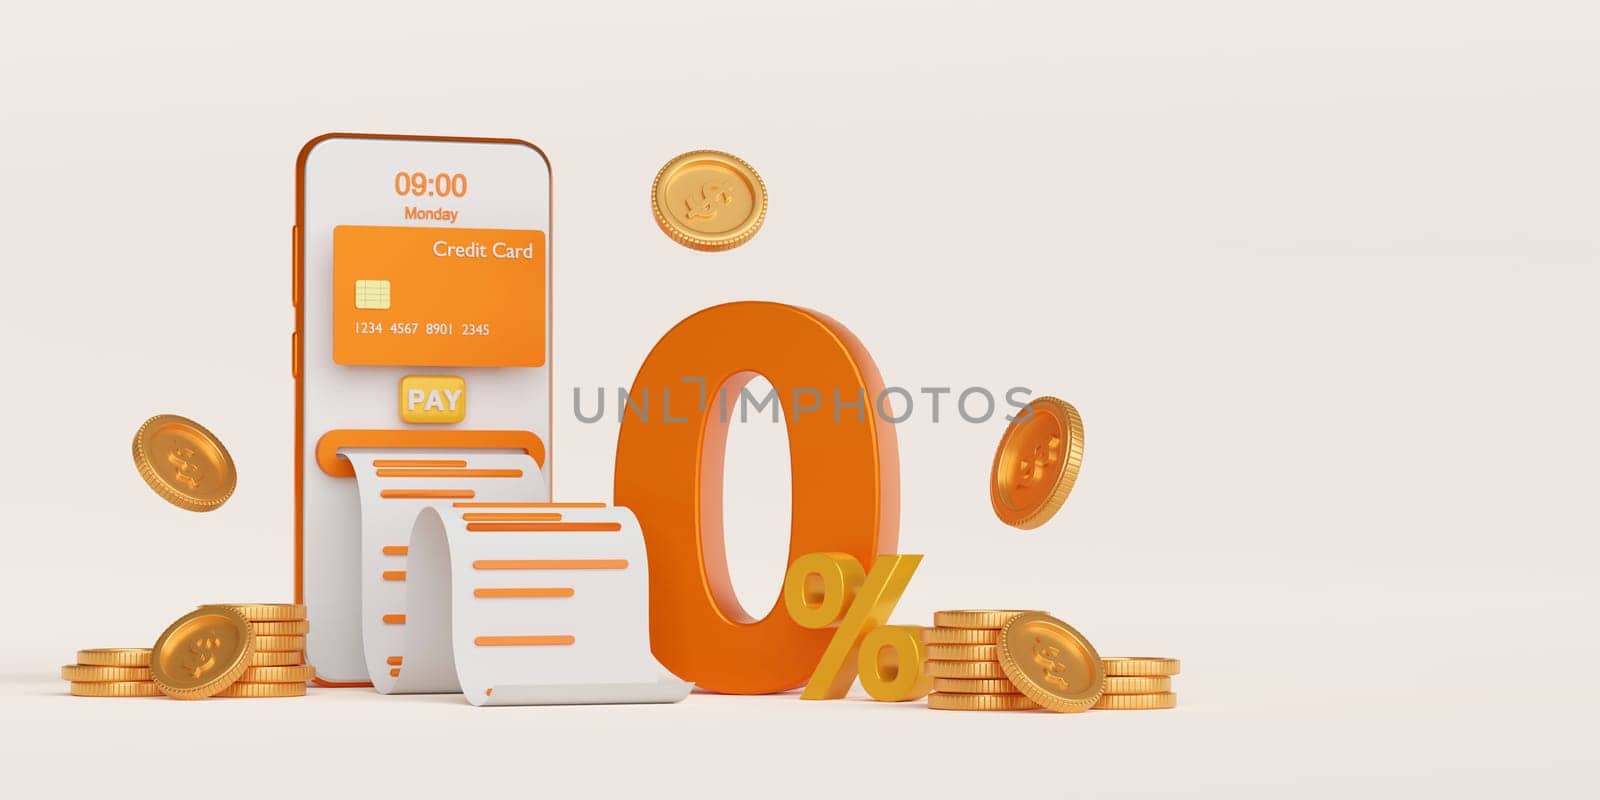 Shopping online using credit card with 0% interest installment payments on smartphone, 3d illustration by nutzchotwarut